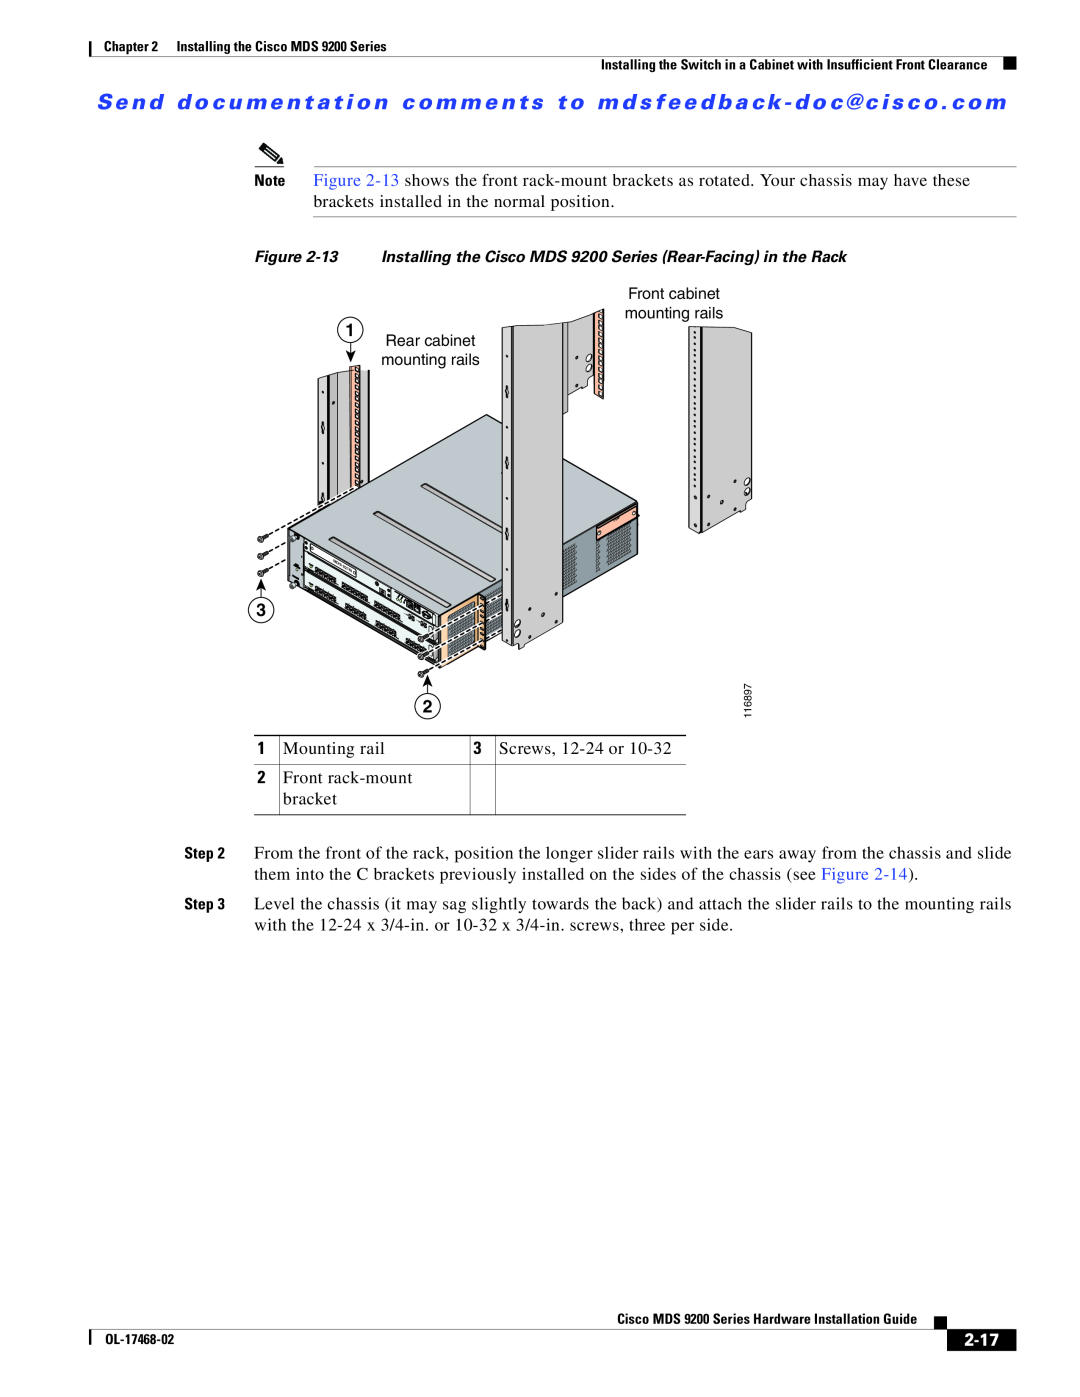 Cisco Systems MDS 9200 Series manual 2-17, Rear cabinet mounting rails, Front cabinet mounting rails 